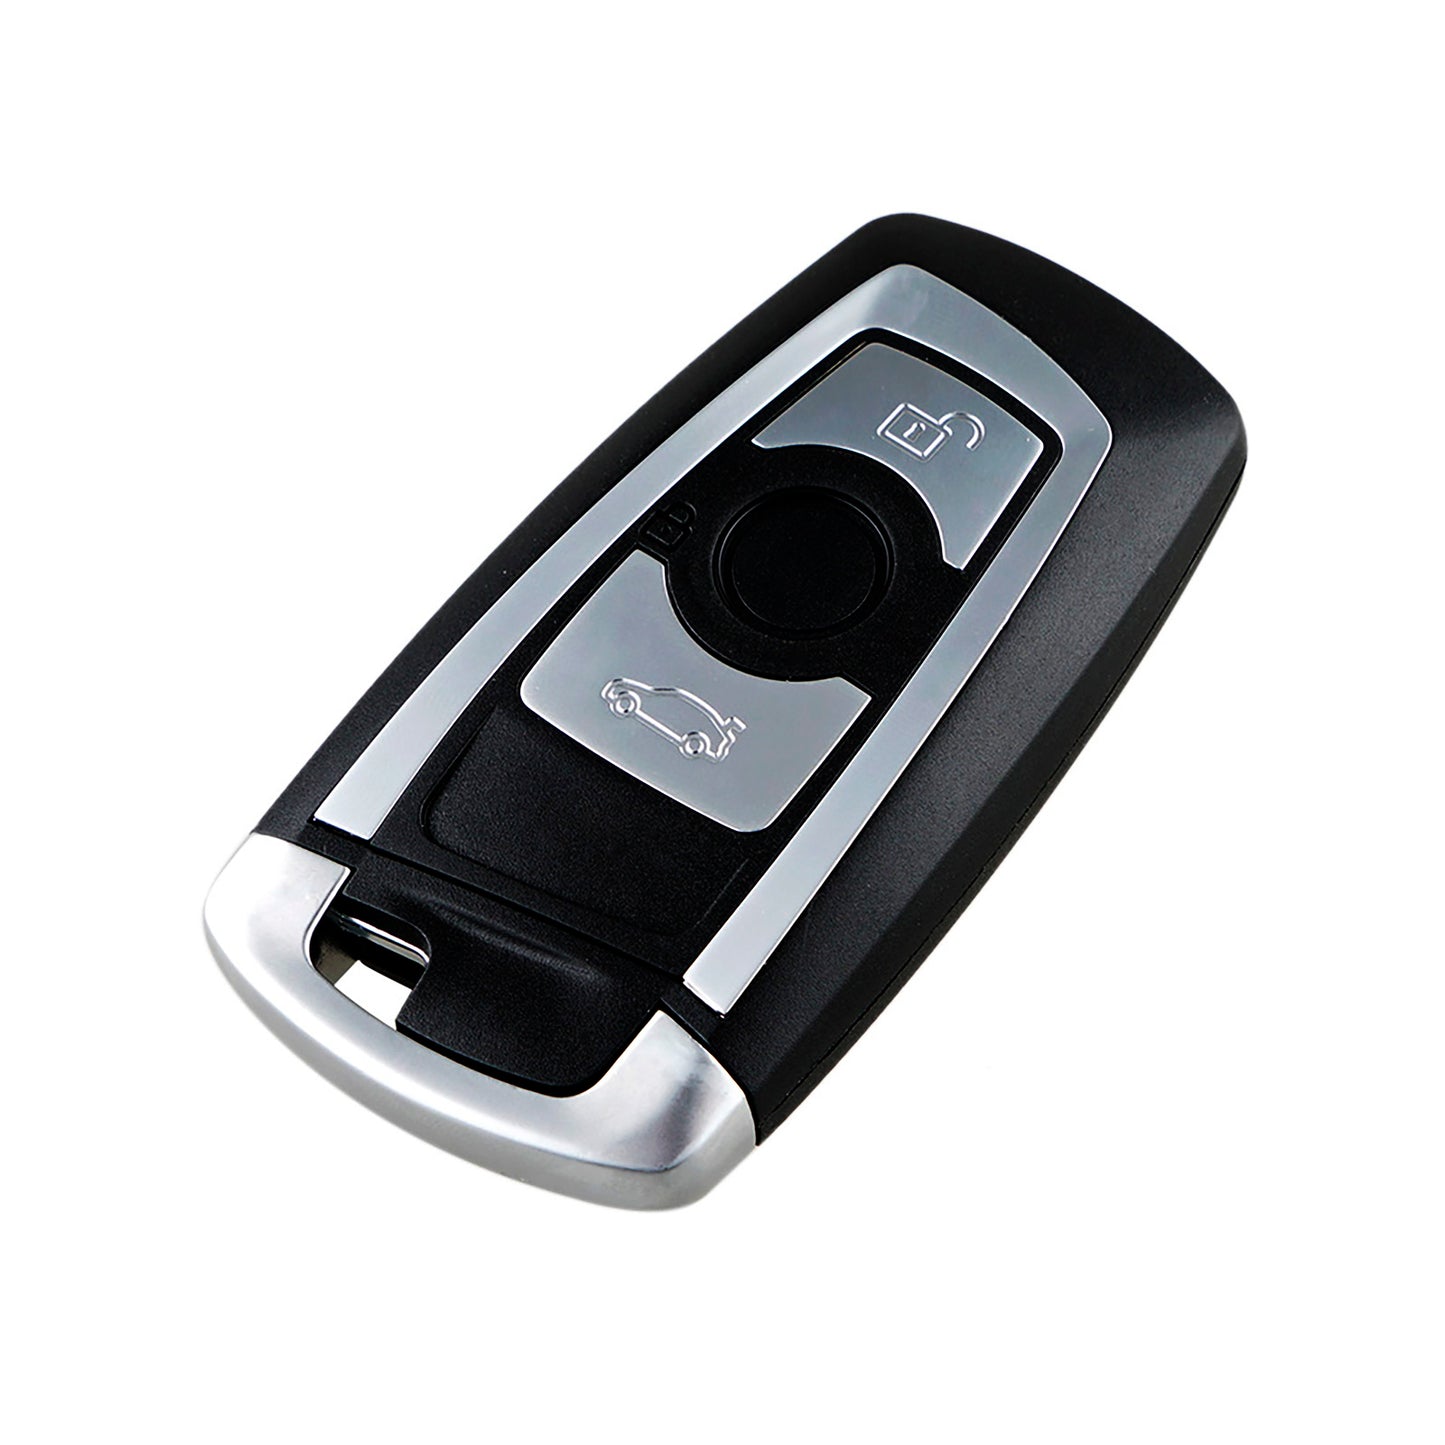 4 Buttons 315MHz Keyless Entry Proximity Remote Smart Fob Car Key For All intelligent FCC ID :OHT01060512, OHT01060512, V2T01060512, V2T01060514, AVL-B01T1AC, AVL-B01T2A SKU:J390